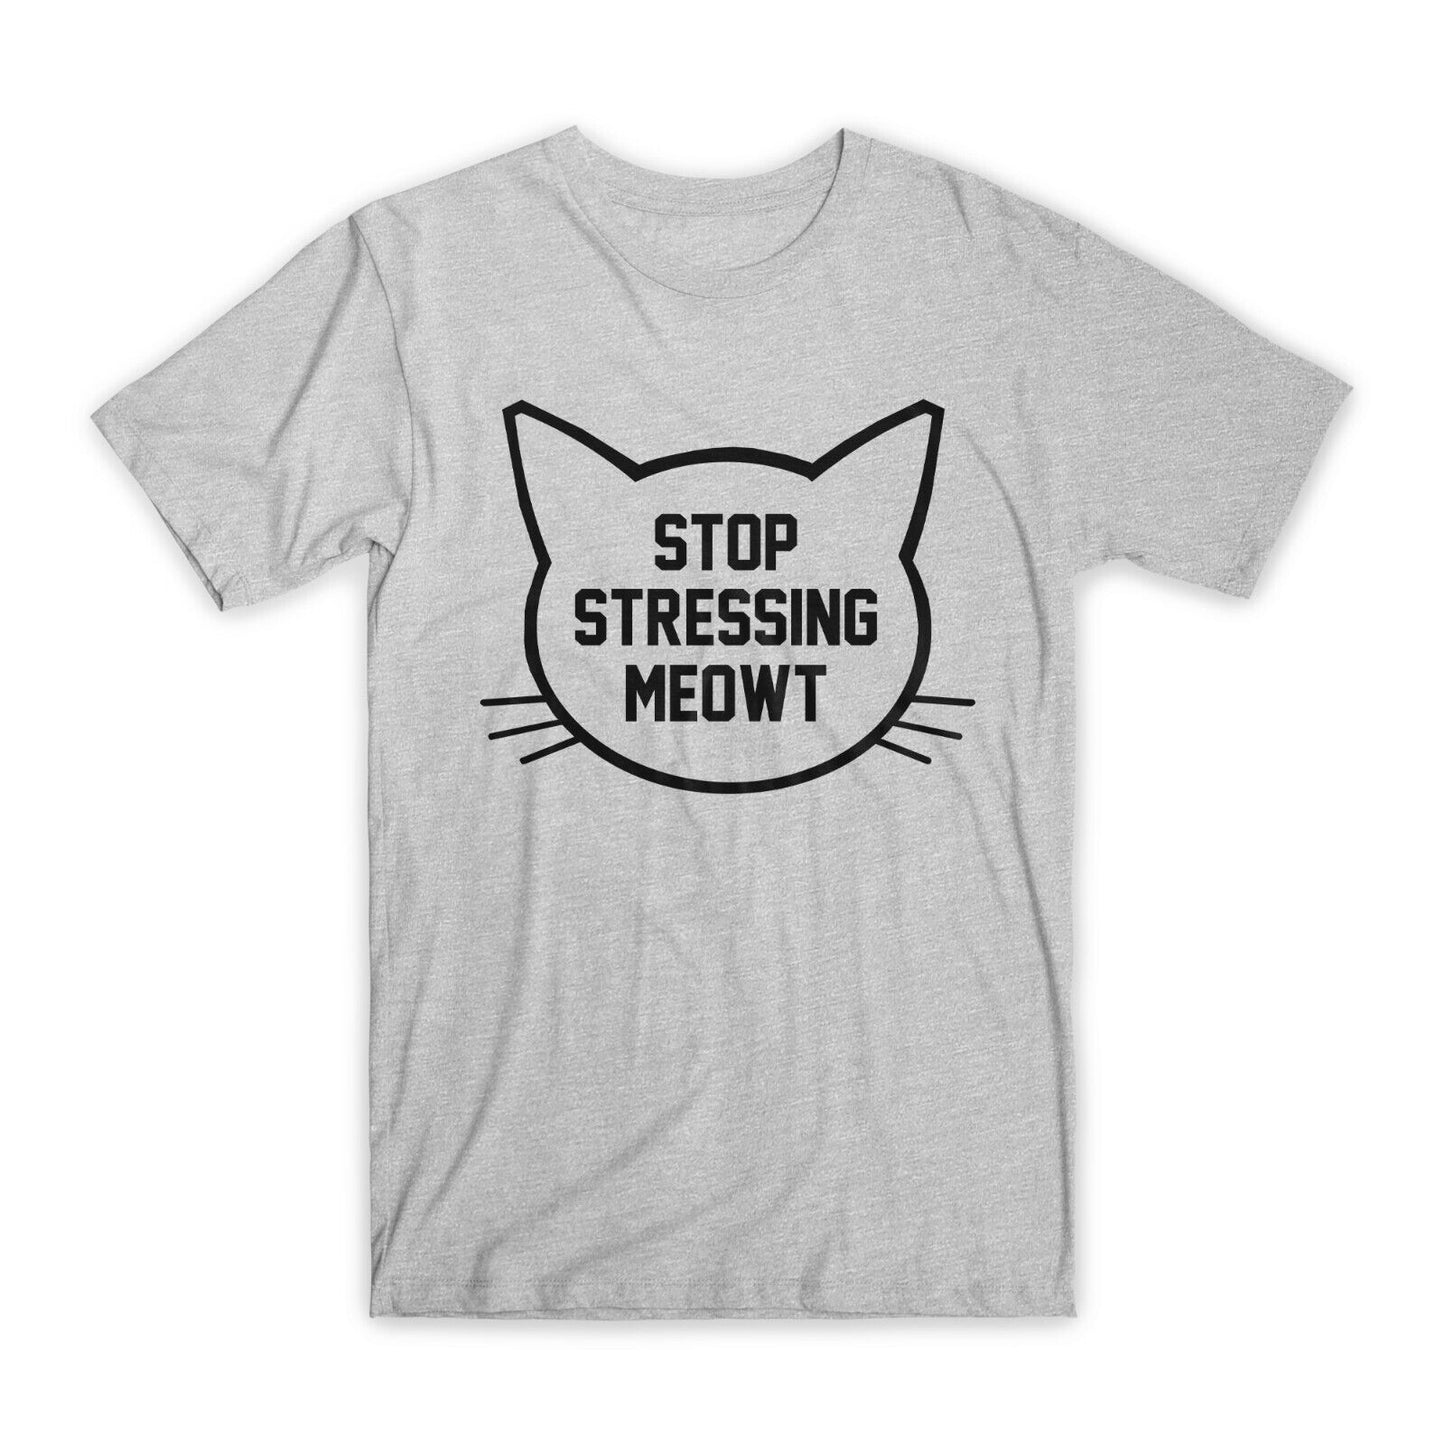 Stop Stressing Meowt T-Shirt Premium Soft Cotton Crew Neck Funny Tees Gifts NEW